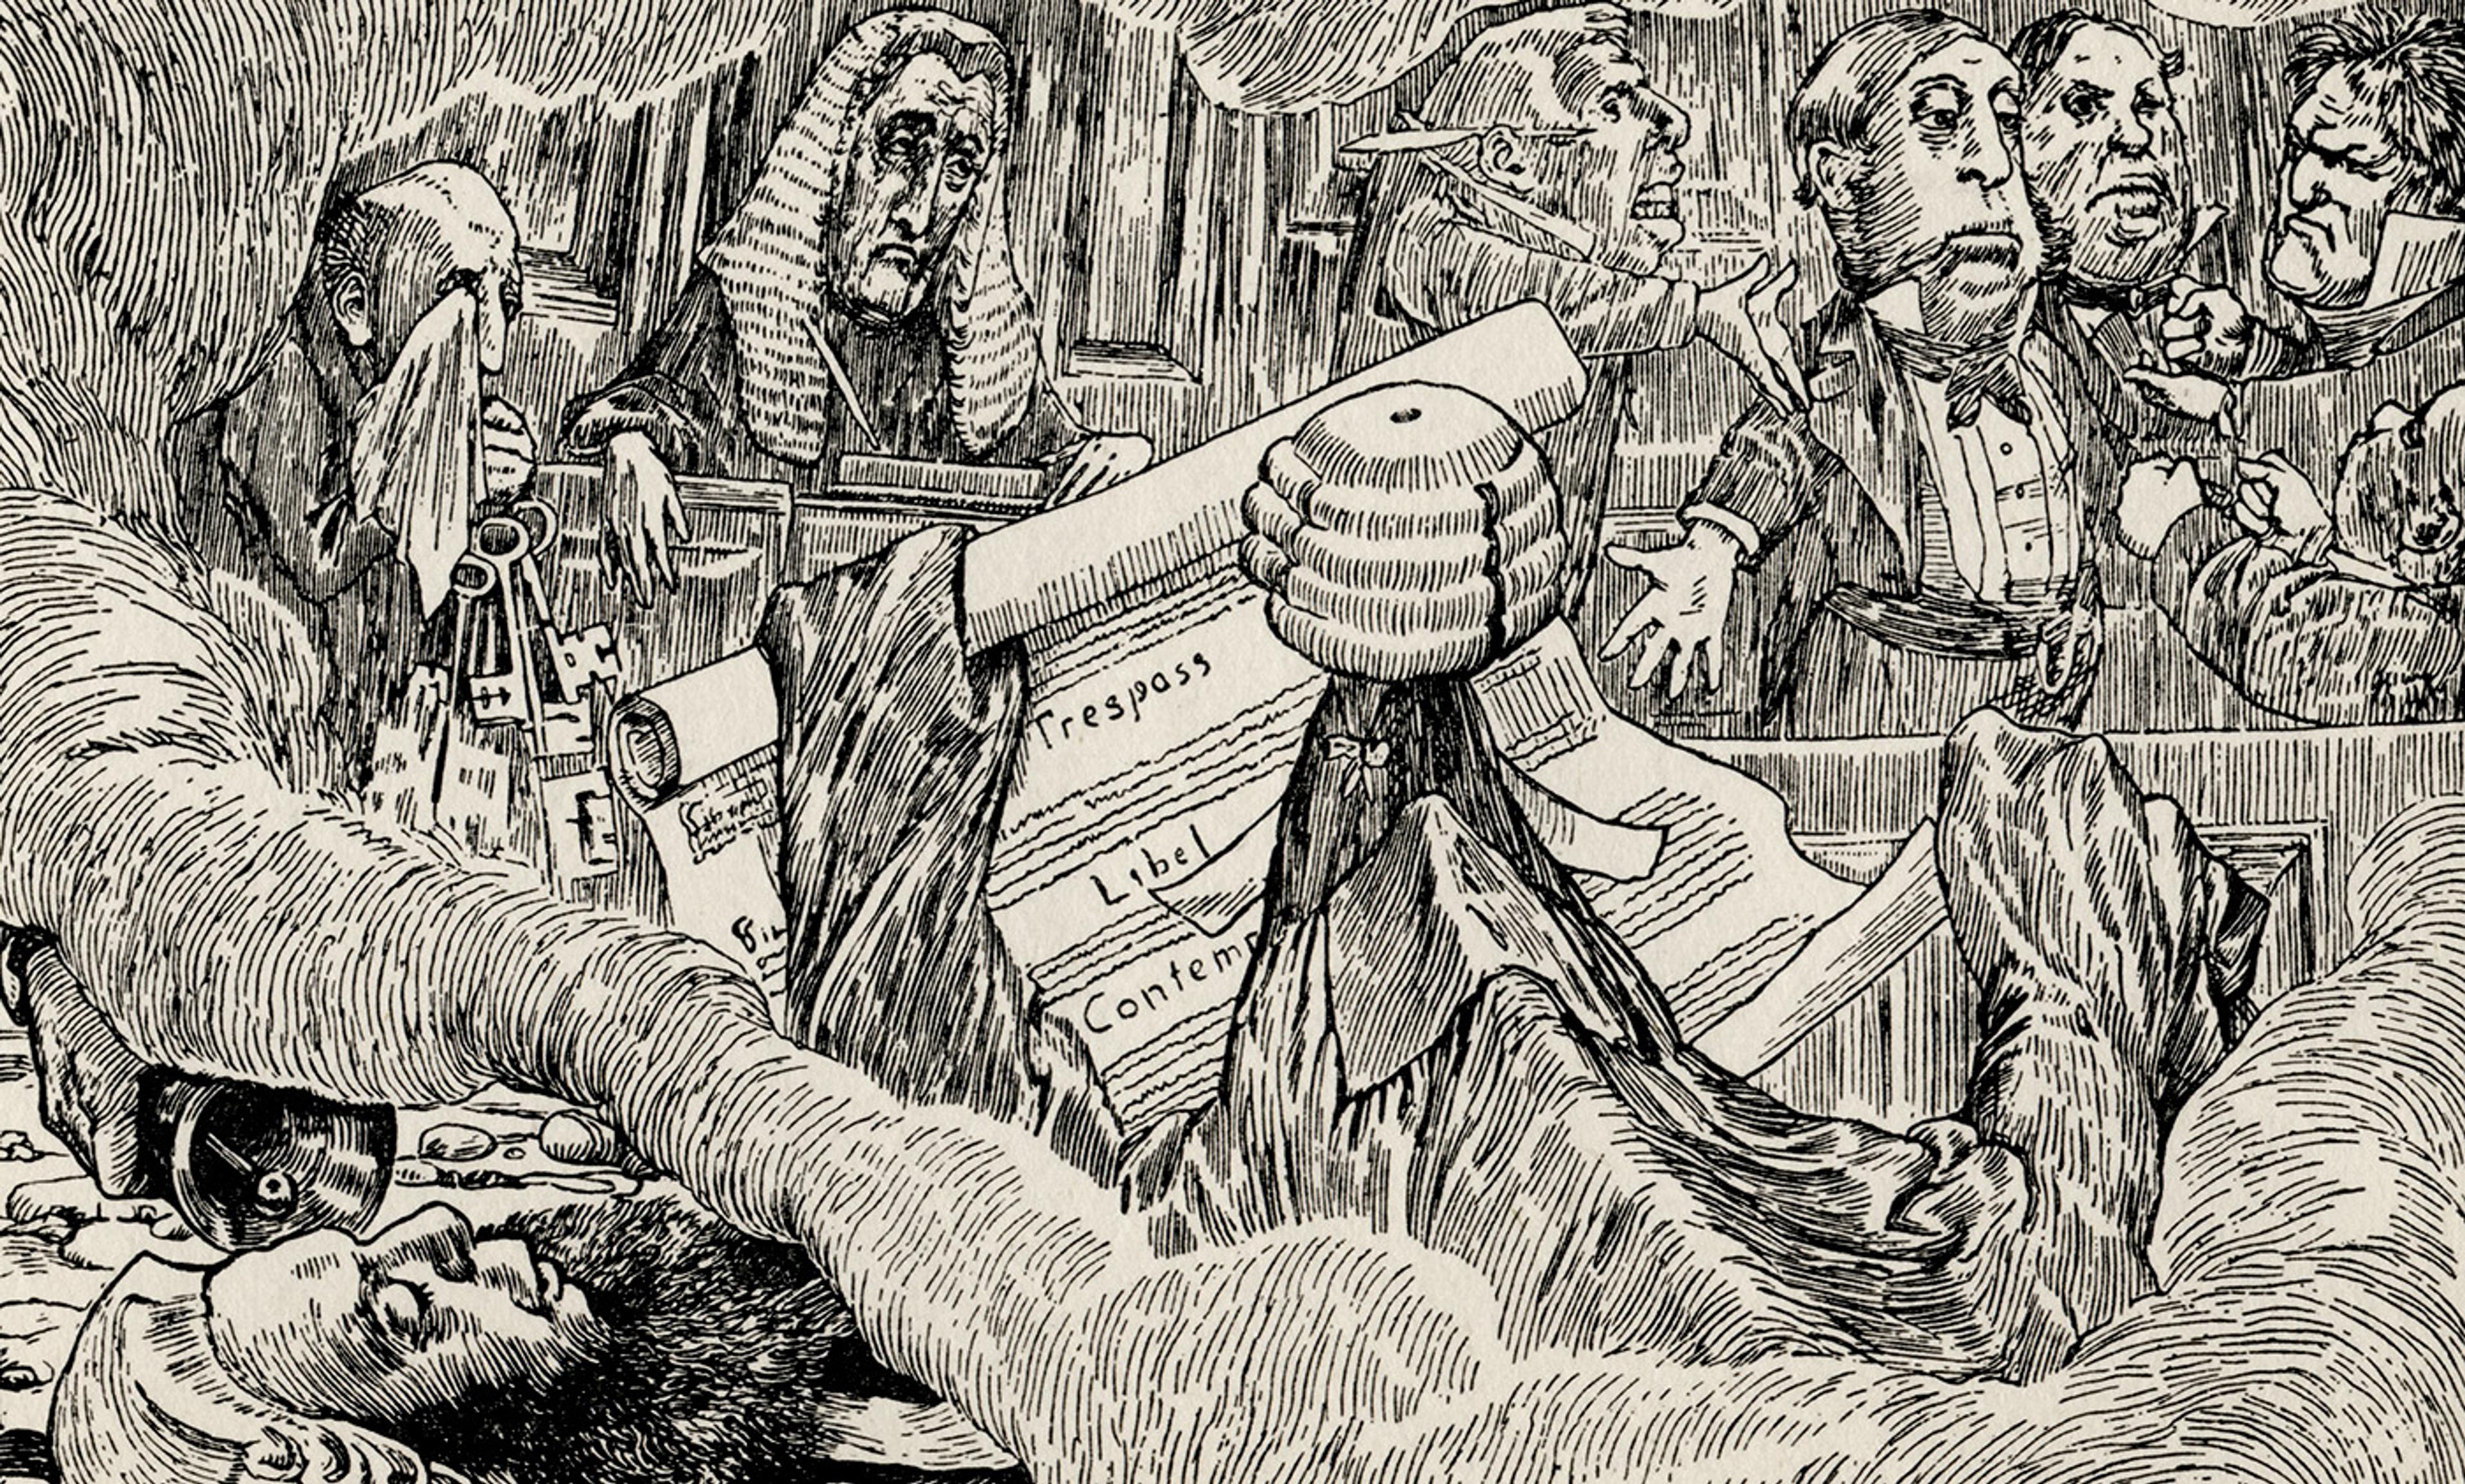 <p>One of Henry Holiday’s original illustrations to <em>The Hunting of the Snark </em>(1876) by Lewis Carroll. The Snark is the foreground in barrister’s robes. <em>Image courtesy Wikimedia</em></p>